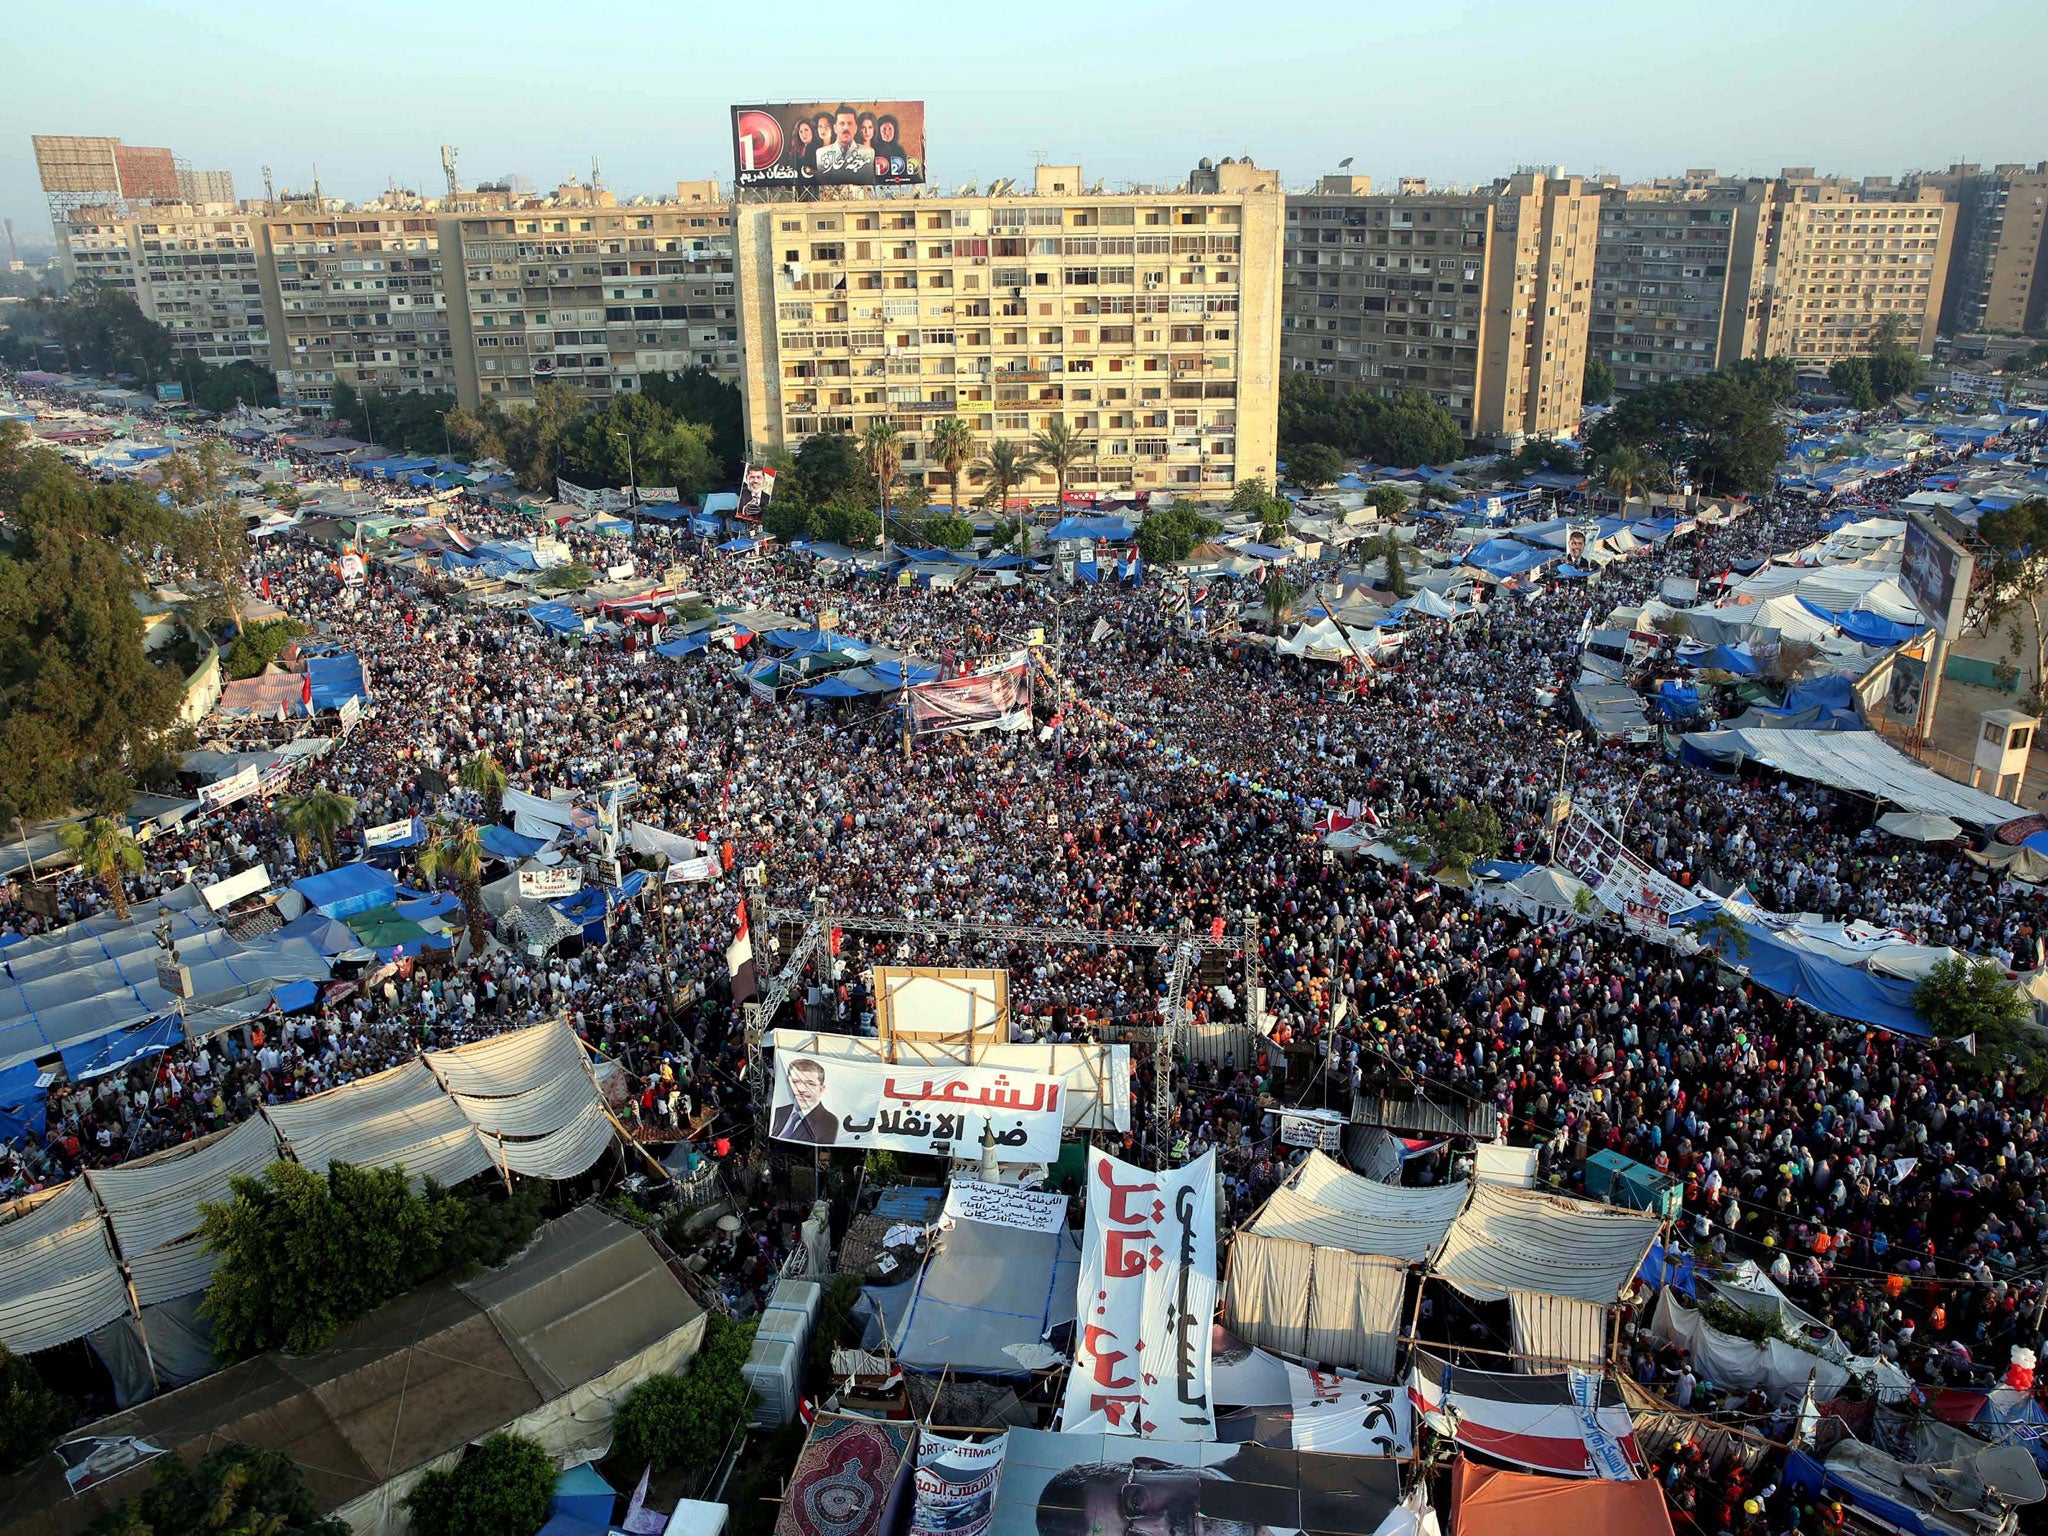 Supporters of the deposed Egyptian President, Mohamed Morsi, continue their sit-in protest near the Rabaa Adawiya mosque in central Cairo